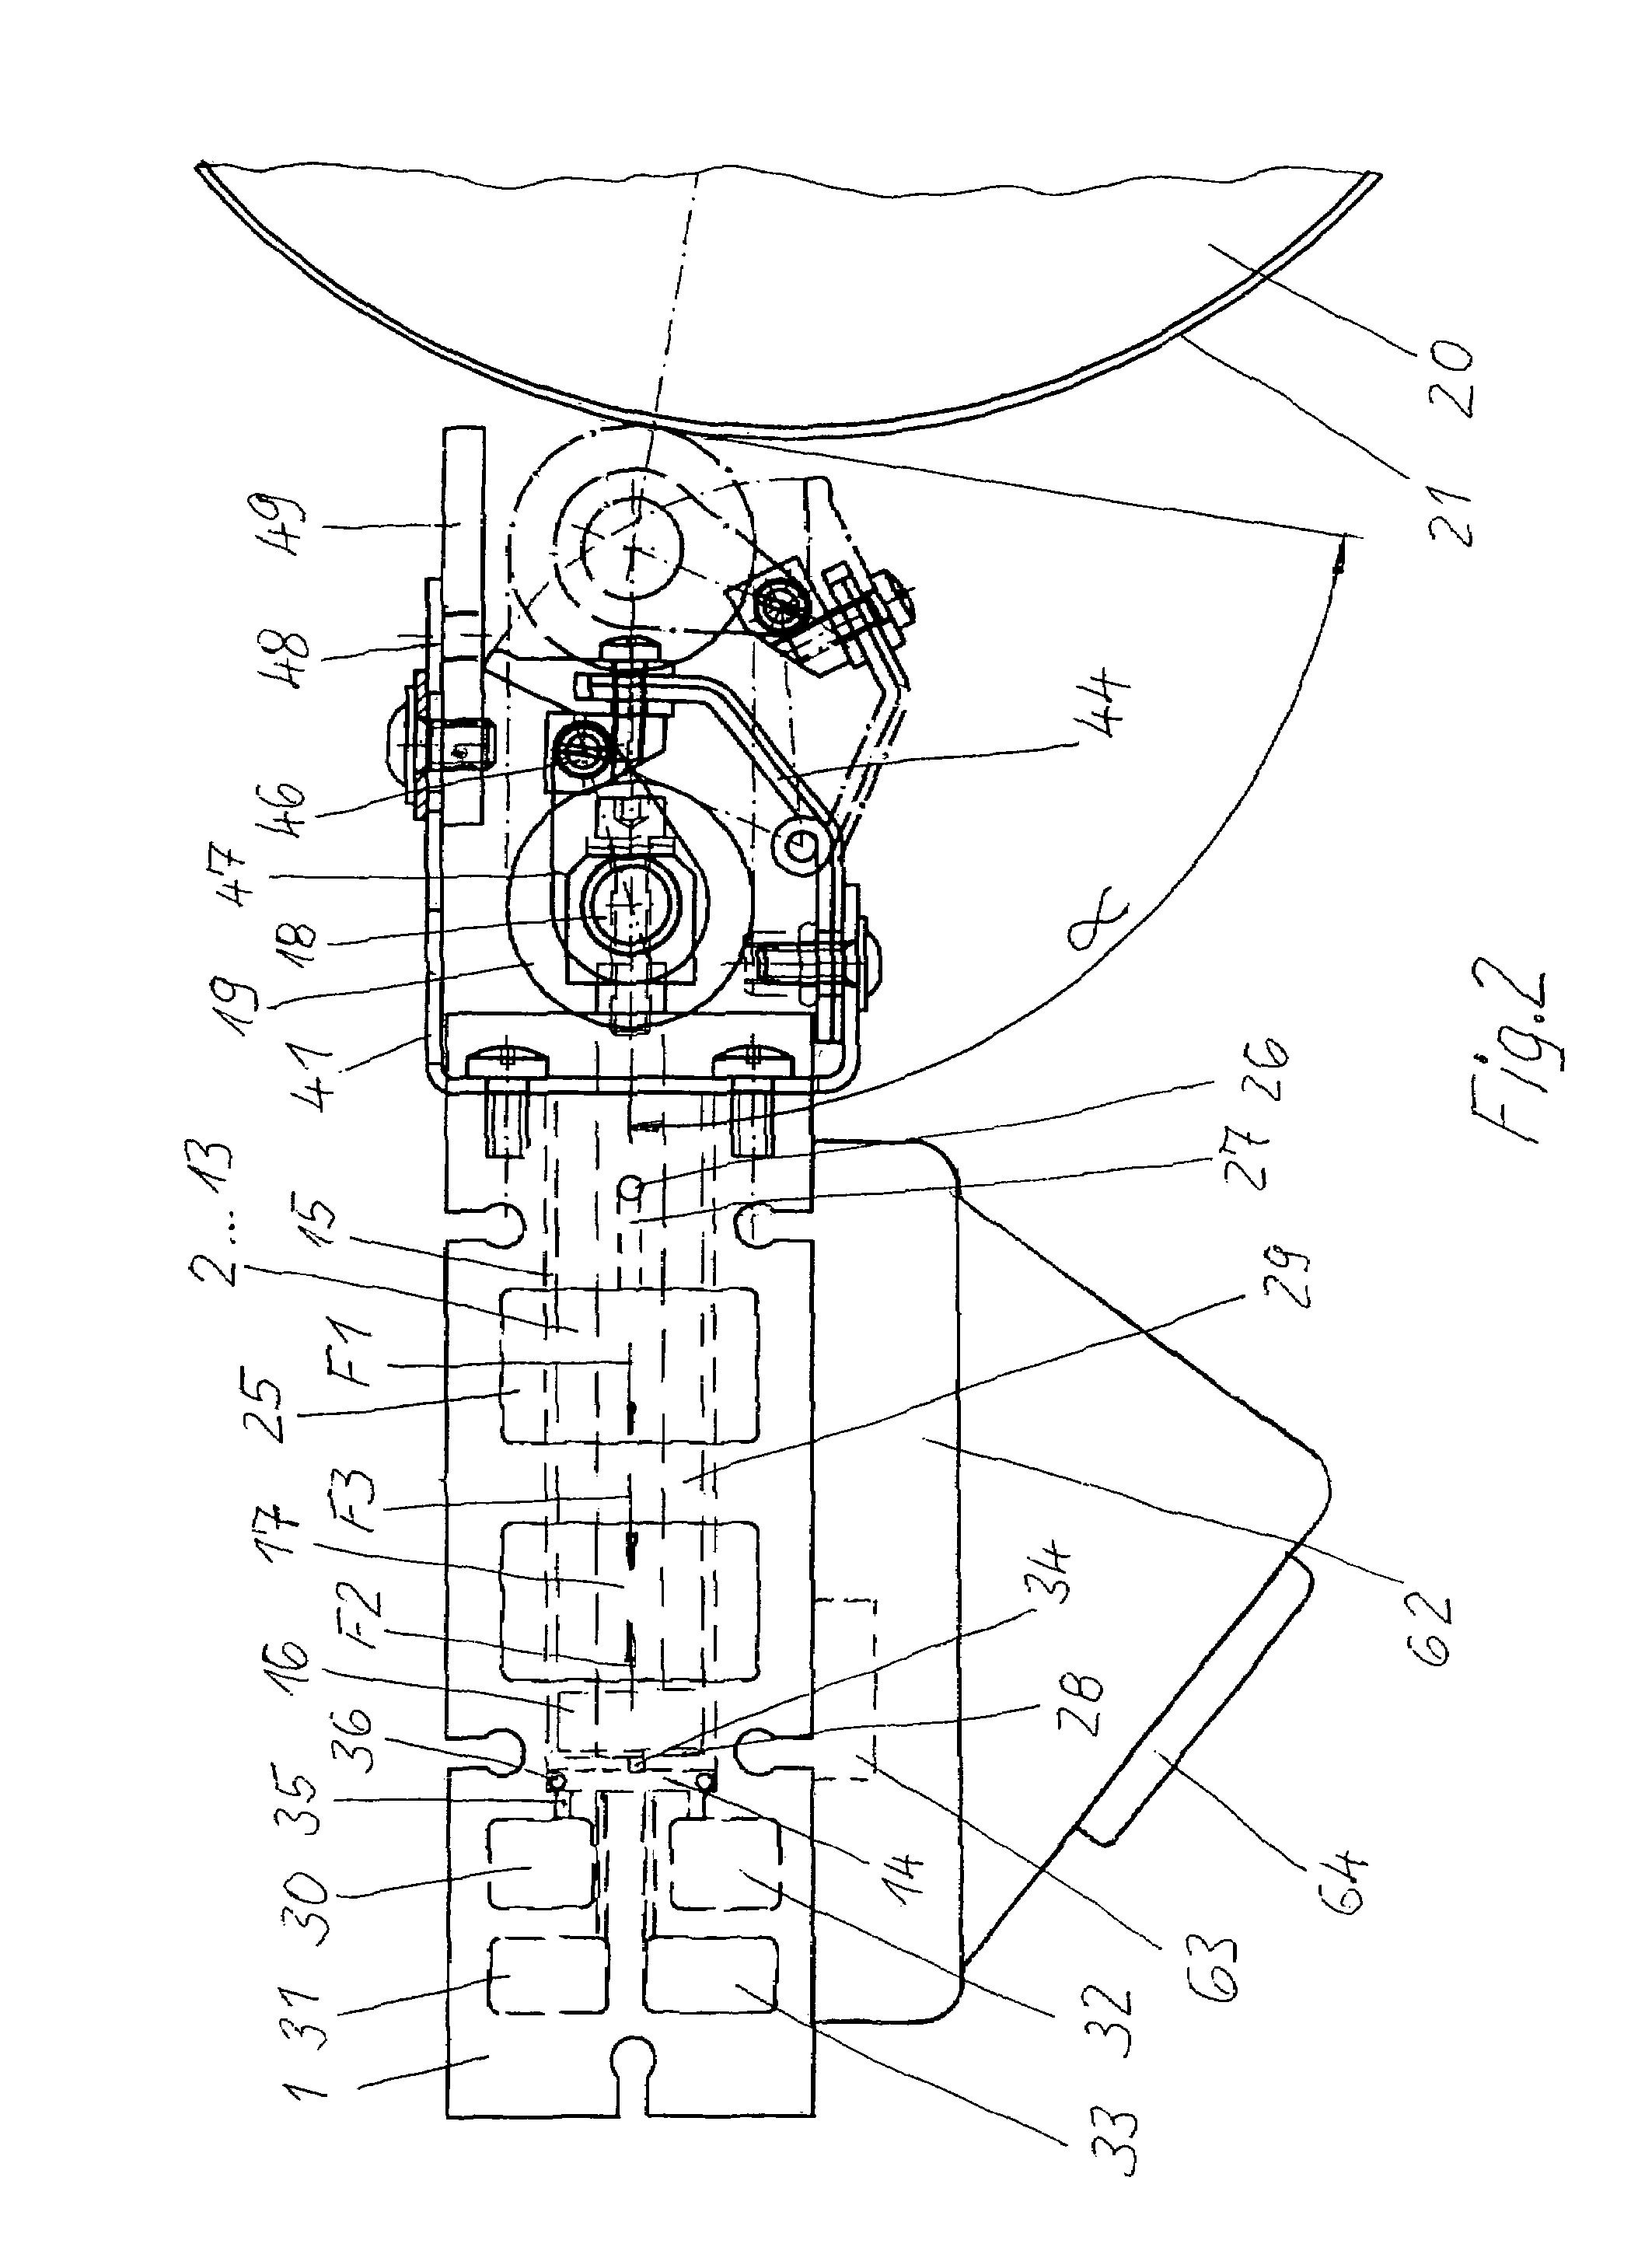 Apparatus for pressing a covering onto a printing-unit cylinder for a rotary press